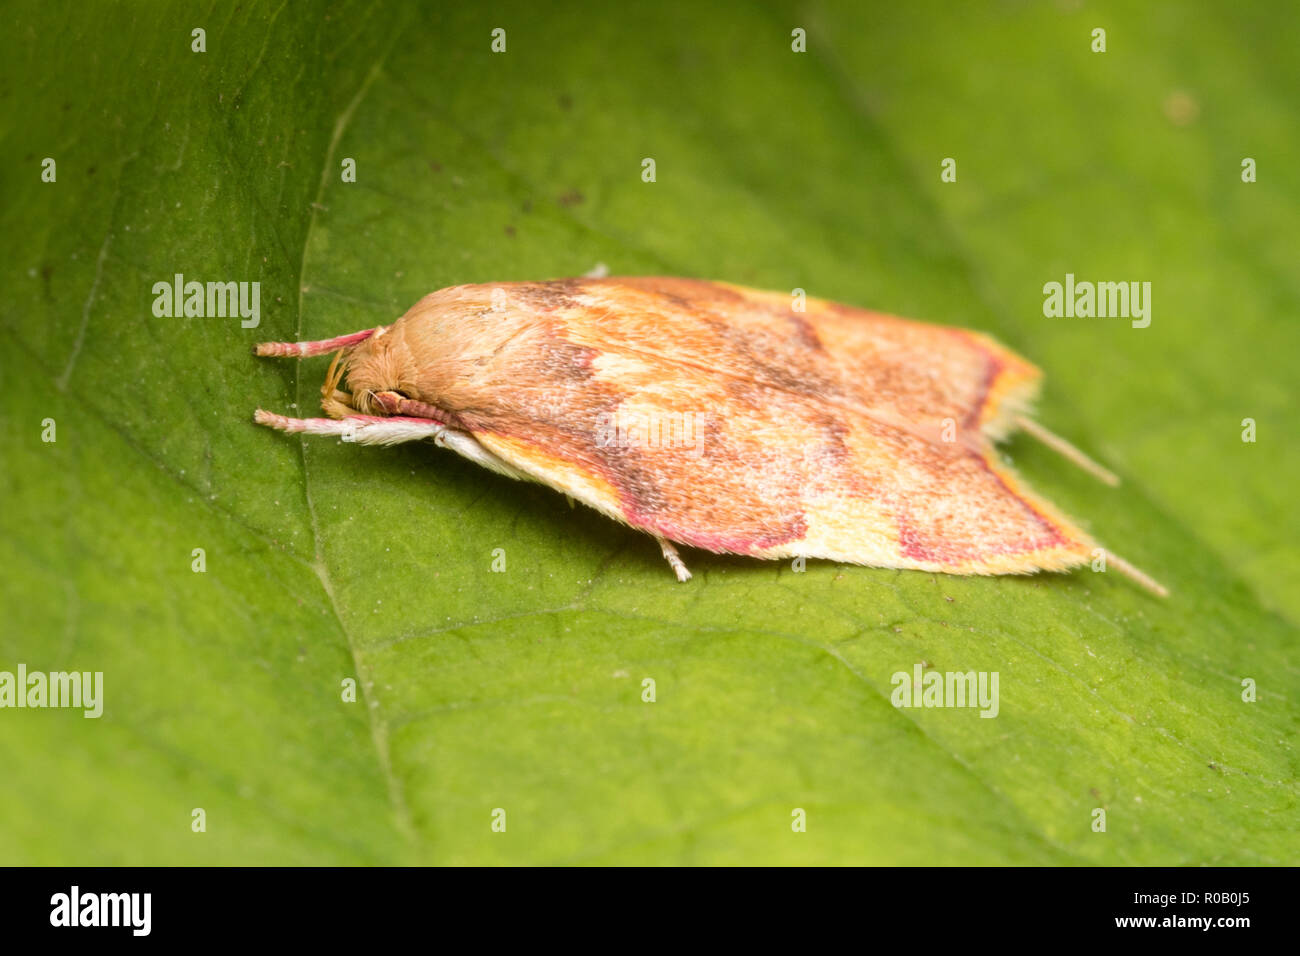 Carcina quercana moth on sycamore leaf. Tipperary, Ireland Stock Photo